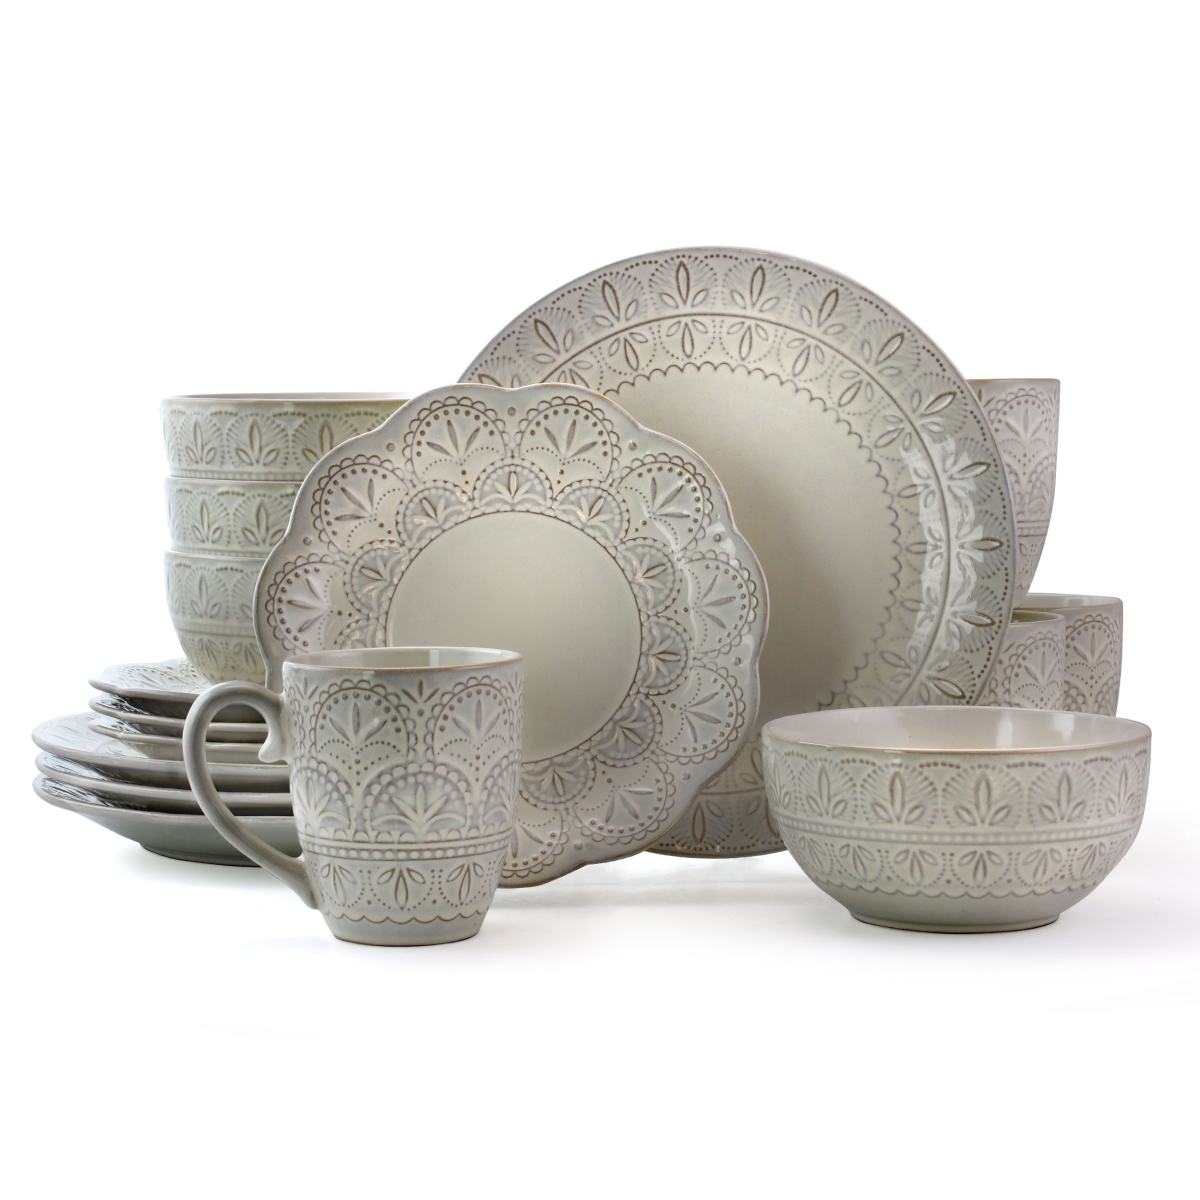 Picture of Elama EL-WHITELACE16 Lace Luxurious Stoneware Dinnerware with Complete Setting for 4 - White - 16 Piece